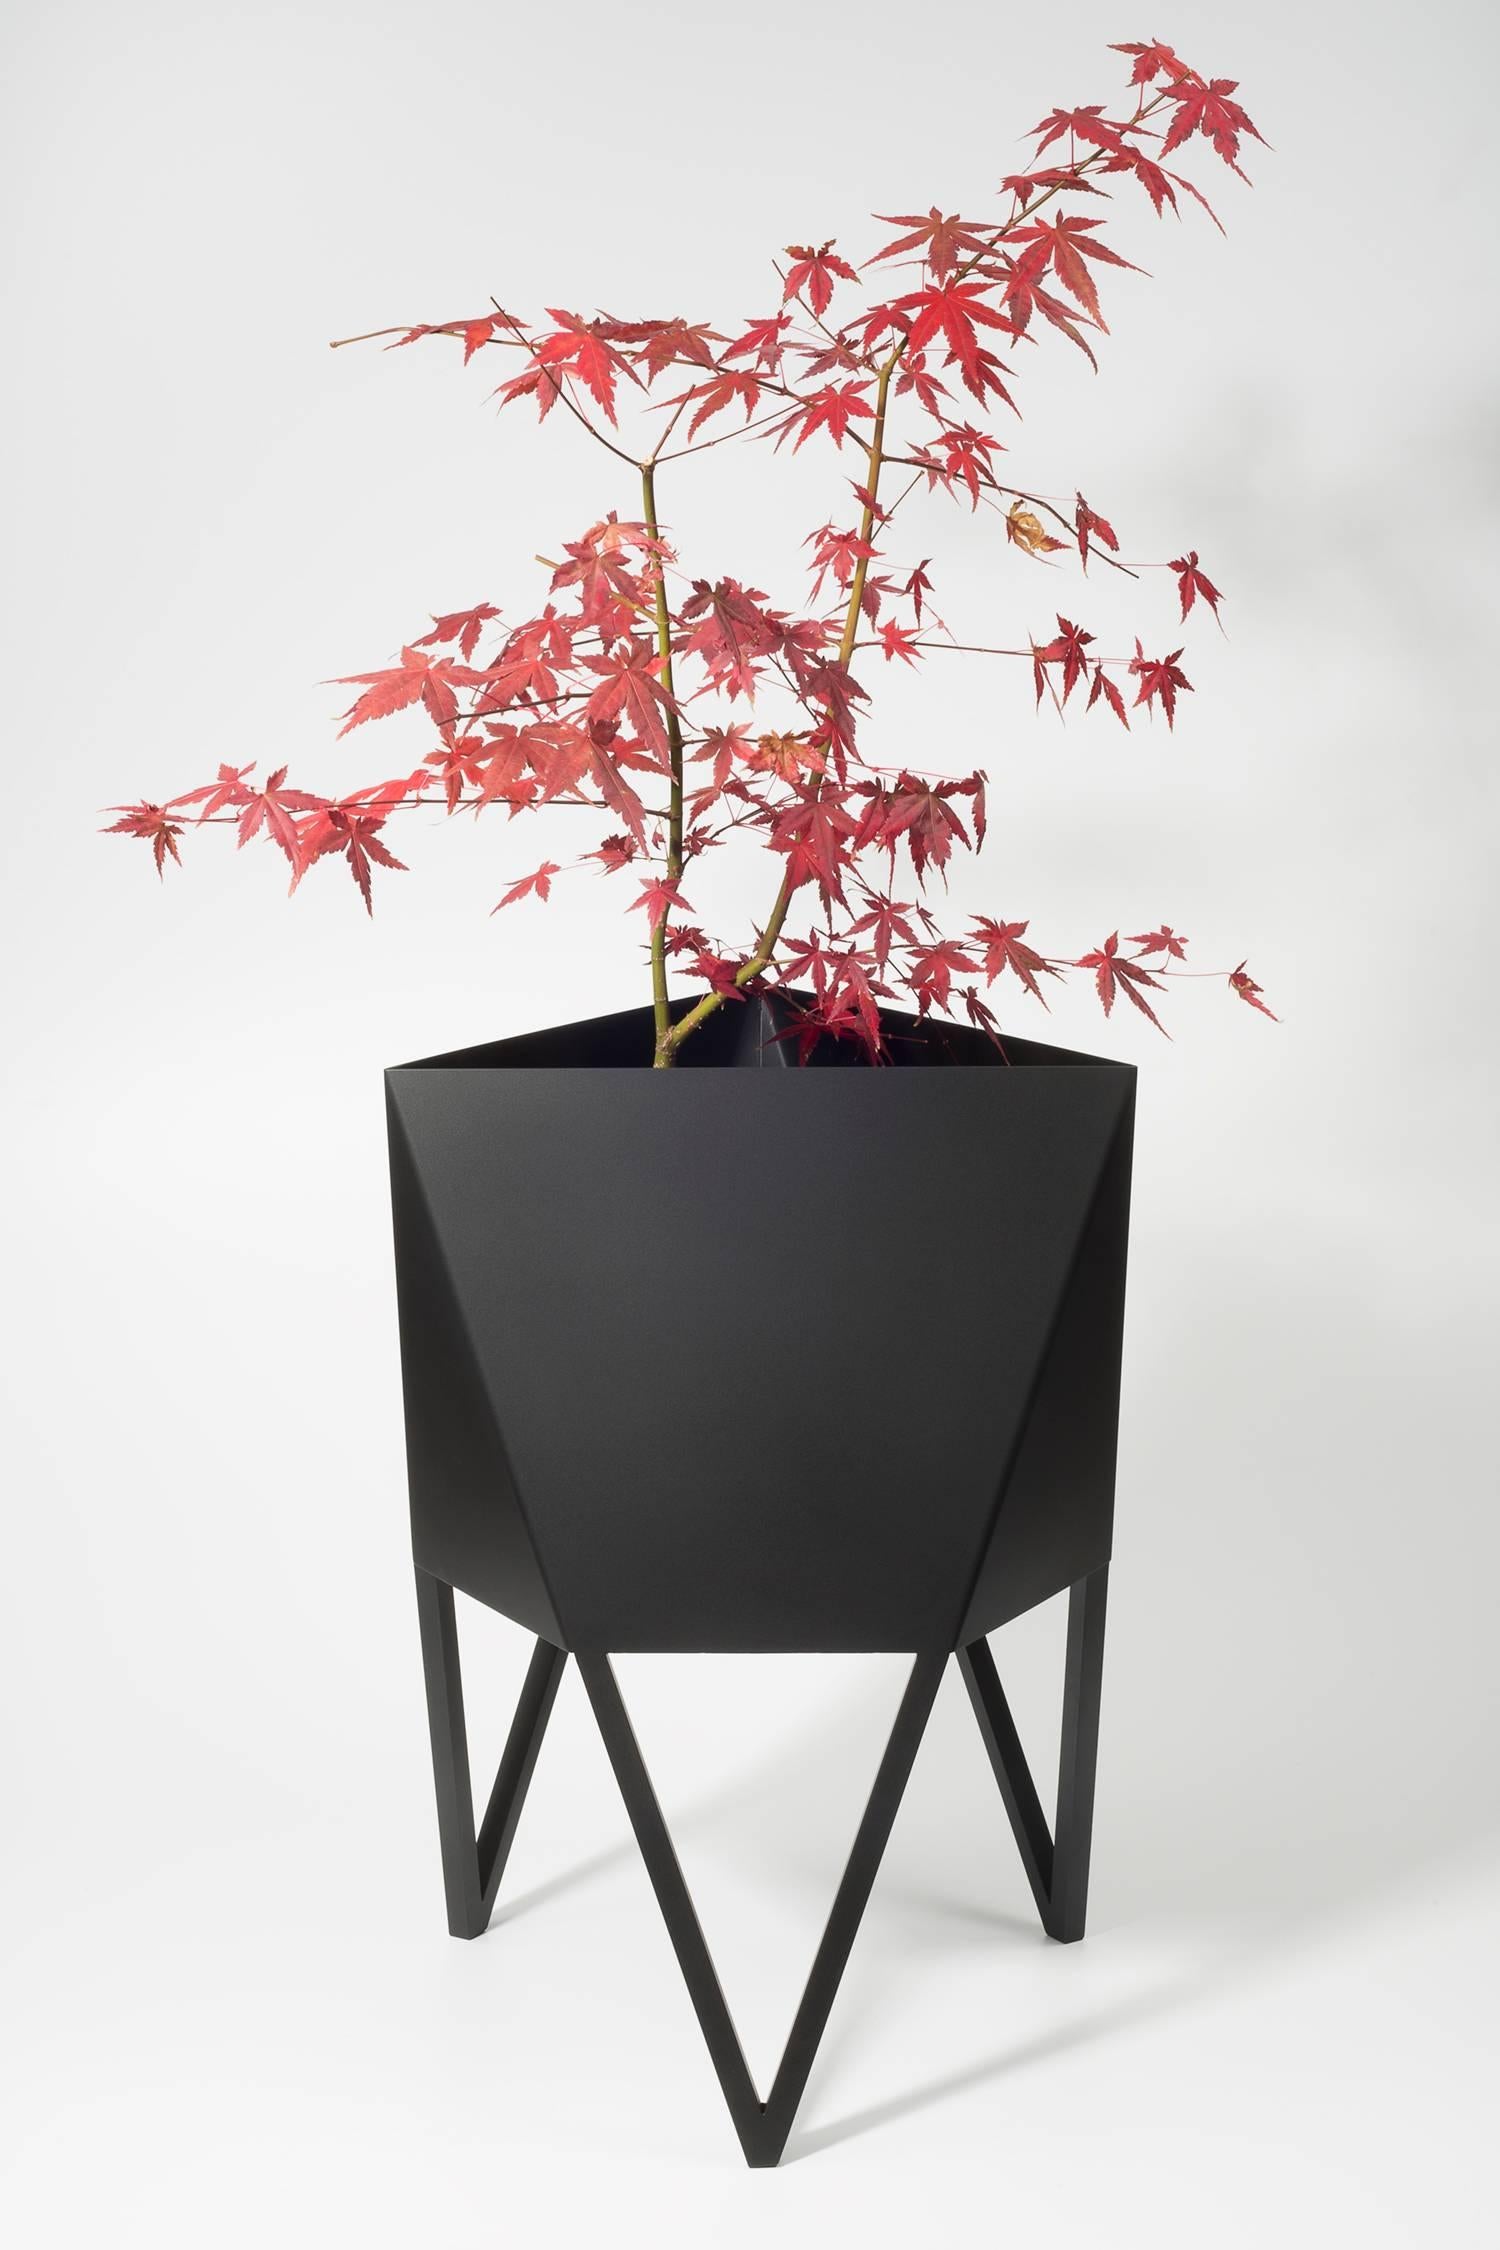 Deca Planter in Glossy Maroon Steel, Small, by Force/Collide 3